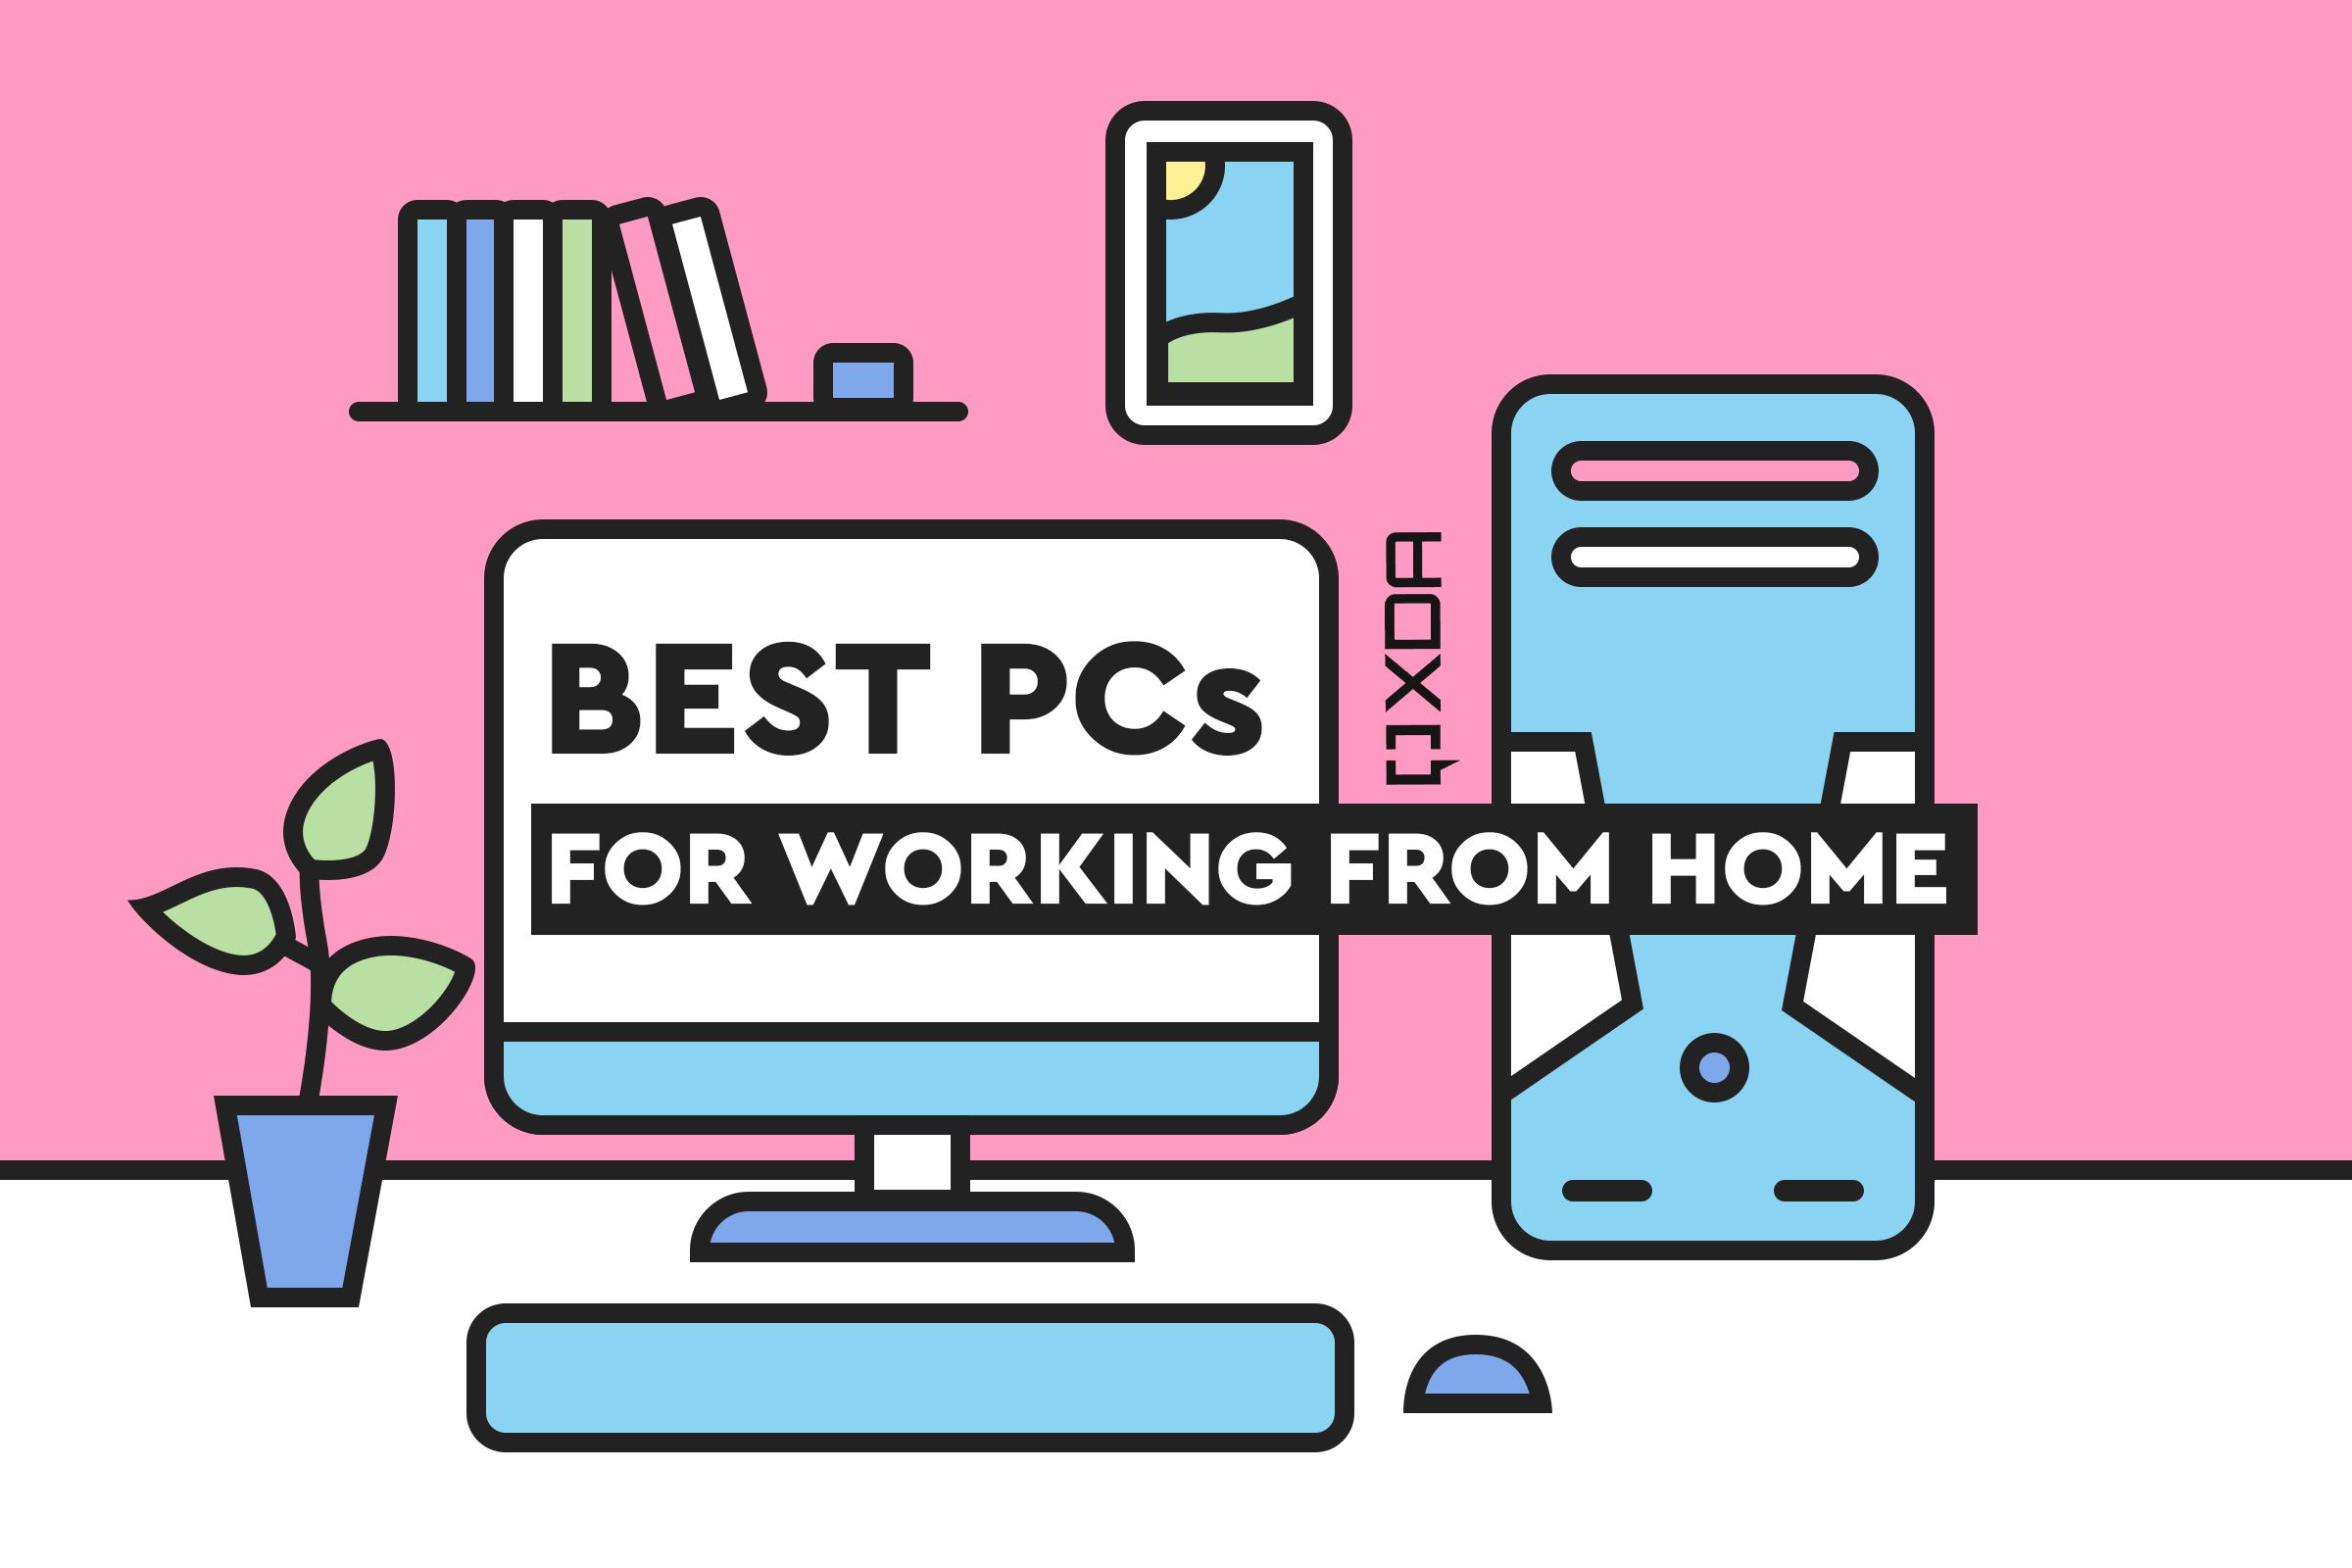 https://static1.xdaimages.com/wordpress/wp-content/uploads/2023/04/best-pcs-for-working-from-home.jpg